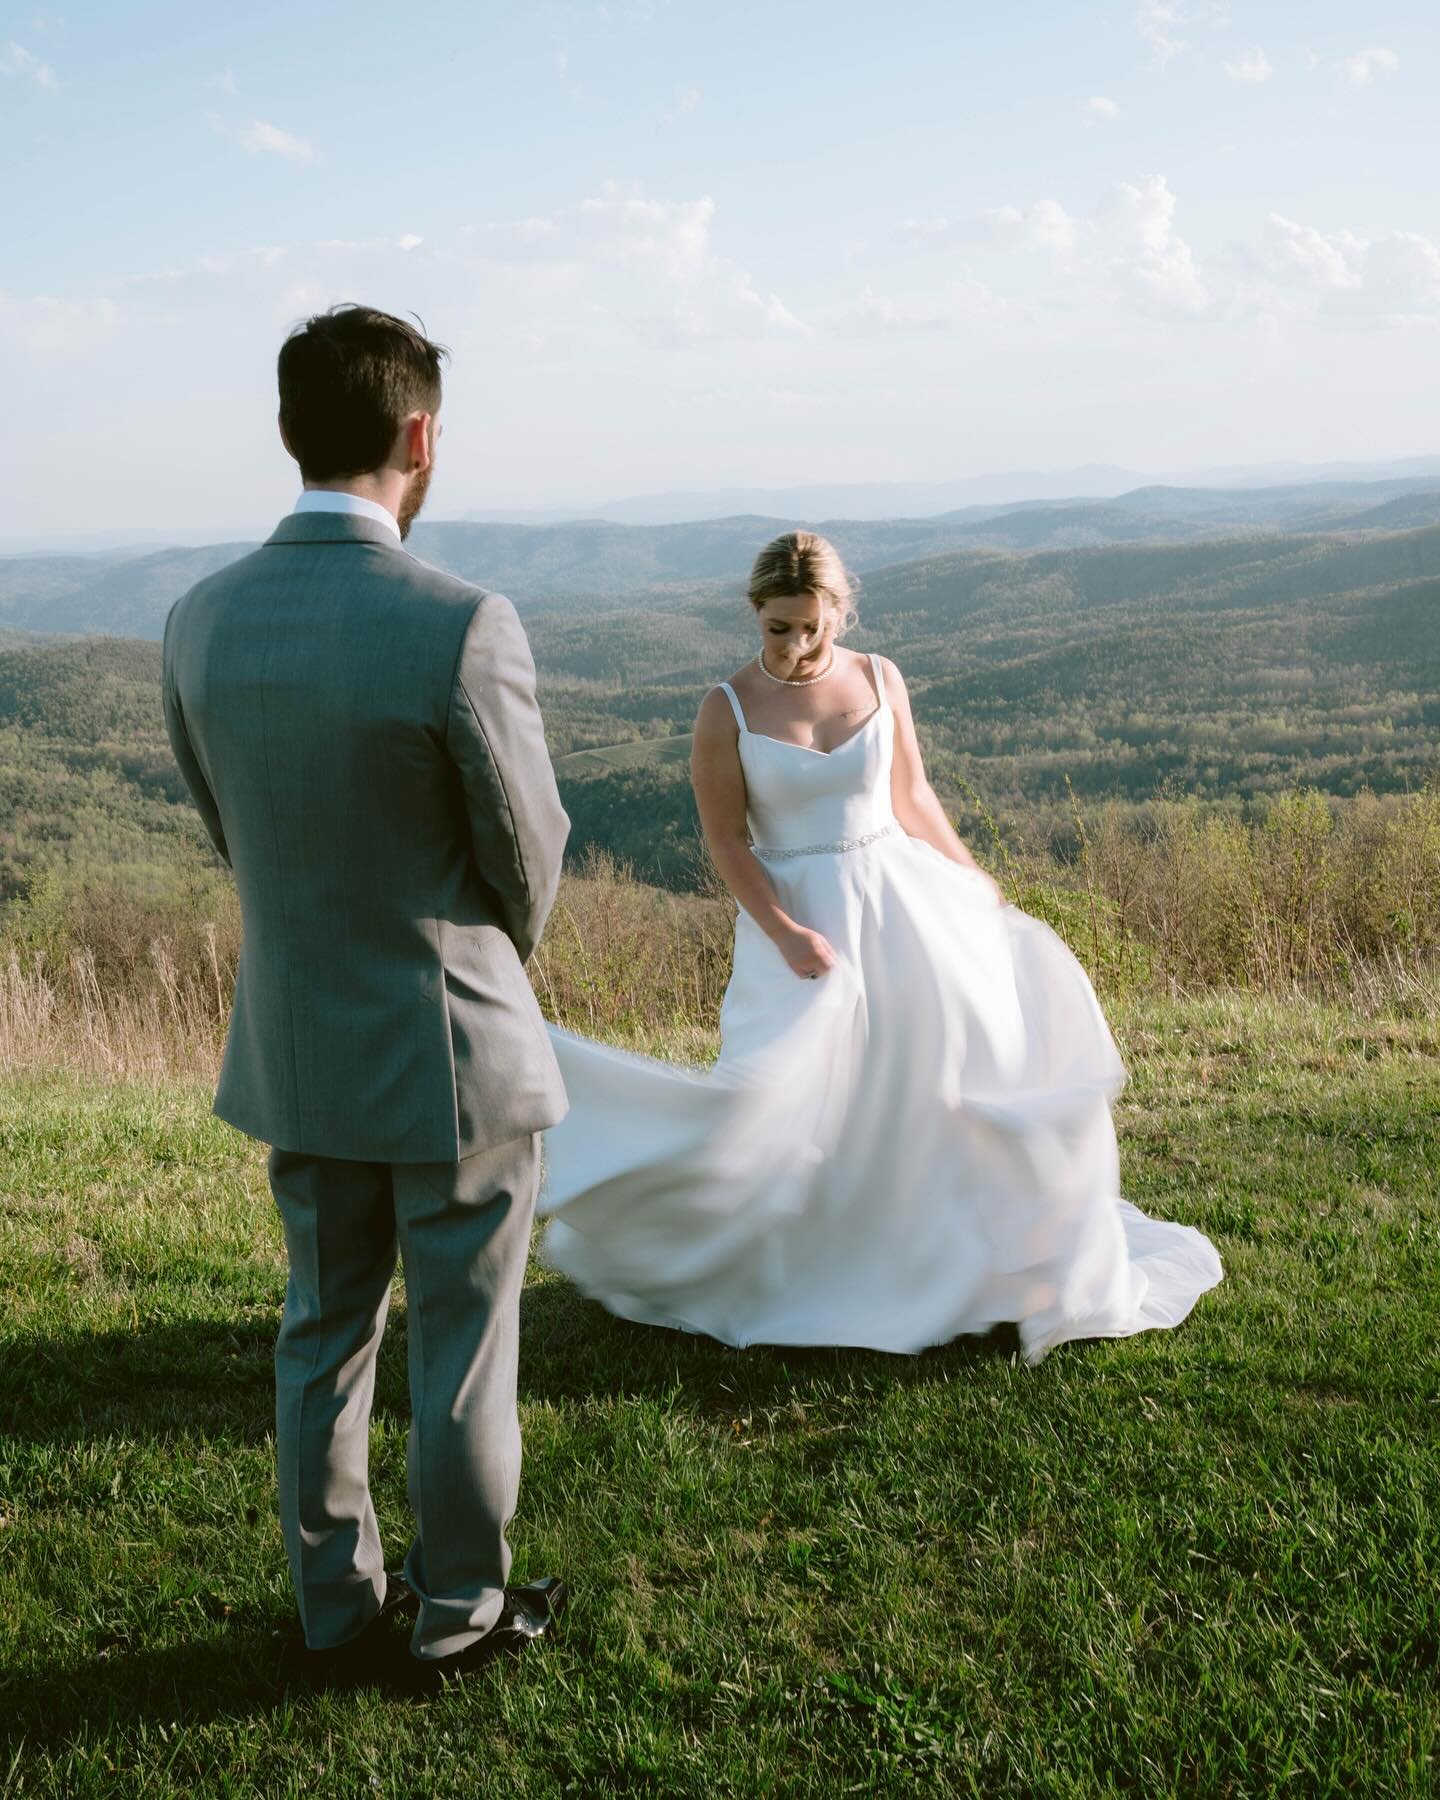 some favorite frames from this stunning mountaintop wedding &mdash;incredible views and incredible people 🖤

NC wedding photographer, intimate weddings, NC elopement photographer, documentary style wedding photography, candid photography, east coast